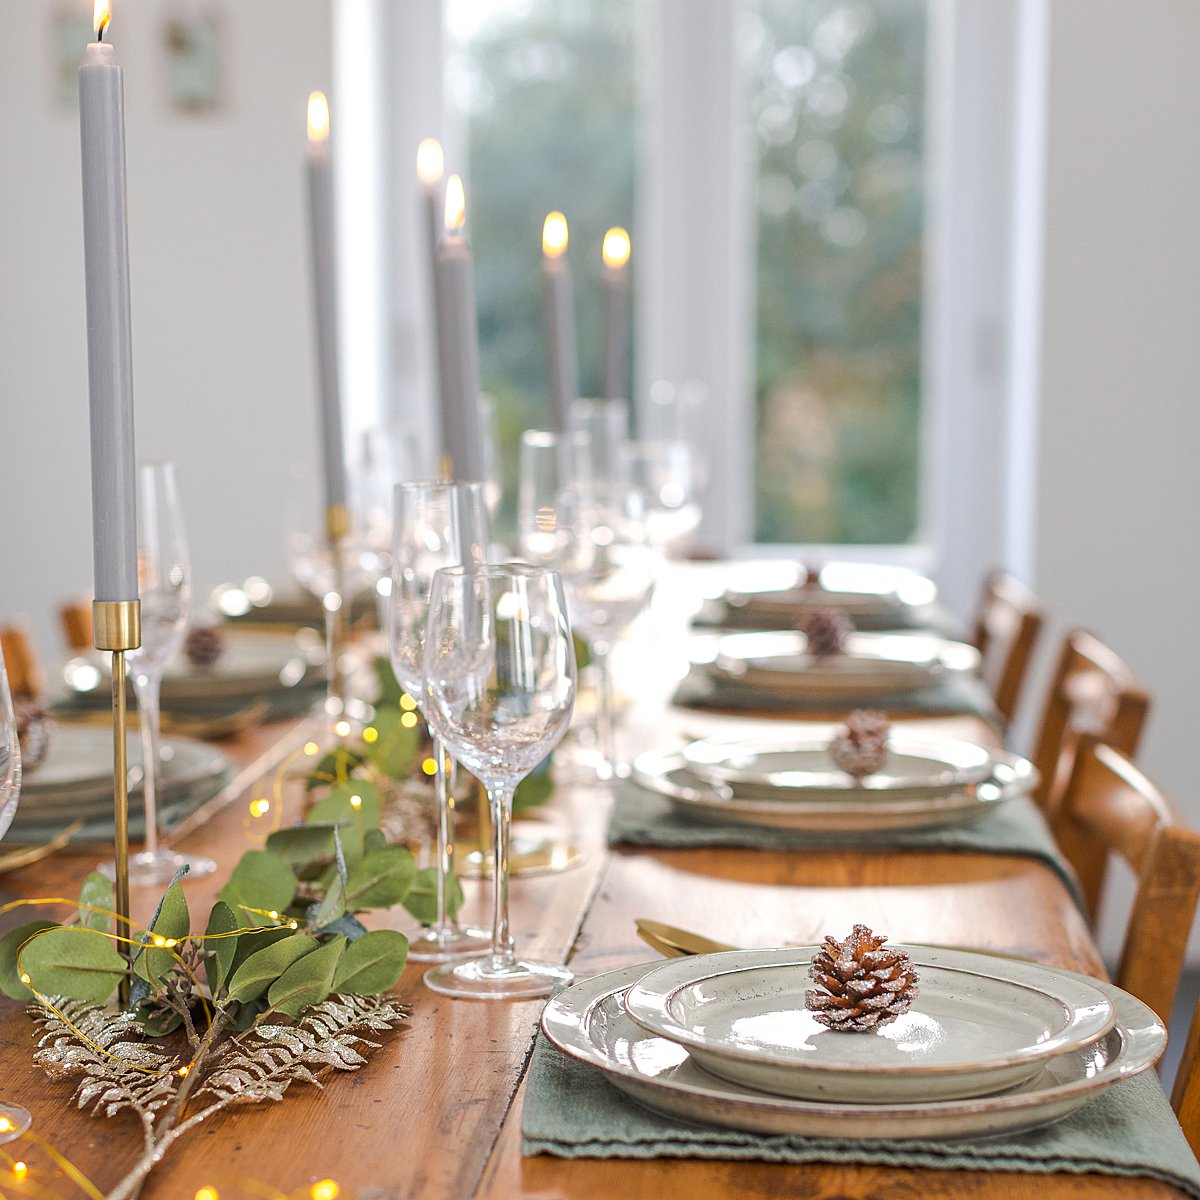 Jo&Co Home: lifestyle shoot for Christmas - Marianne Taylor